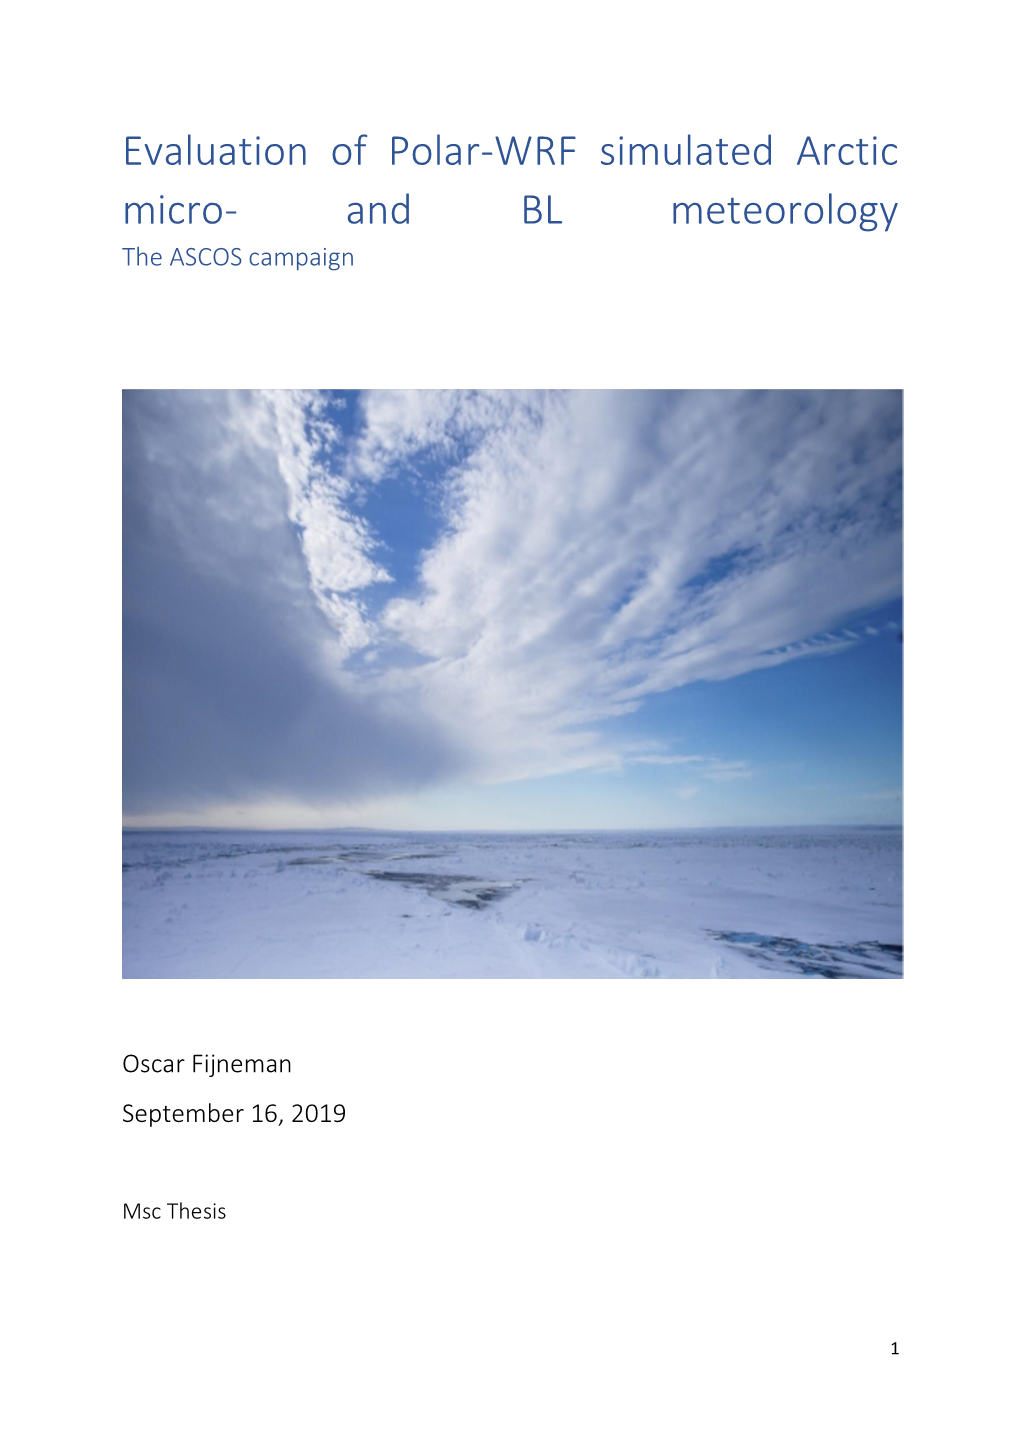 Evaluation of Polar-WRF Simulated Arctic Micro- and BL Meteorology the ASCOS Campaign